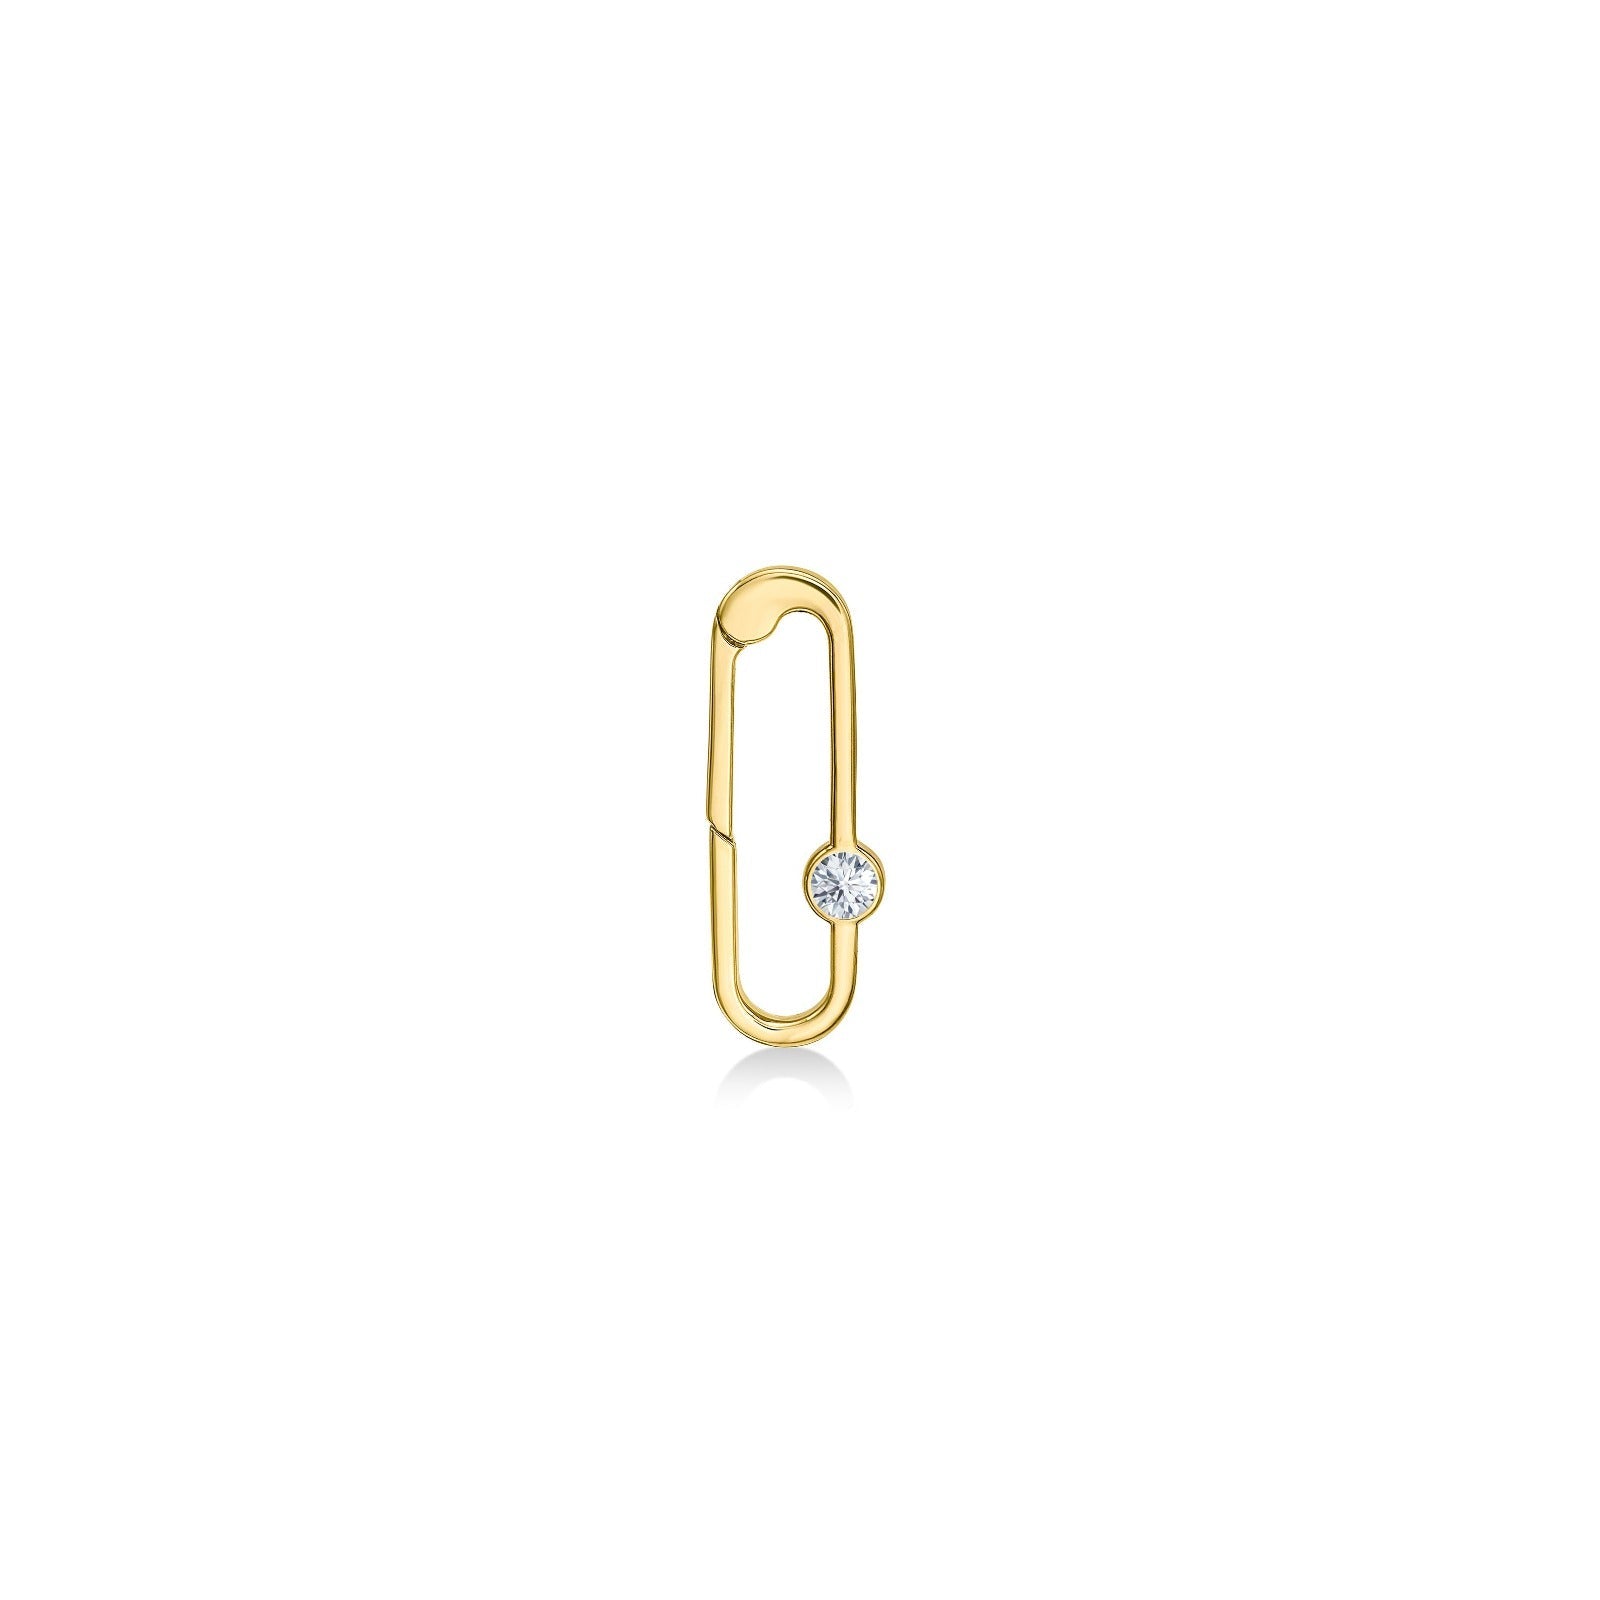 14k gold paperclip charm lock with diamond